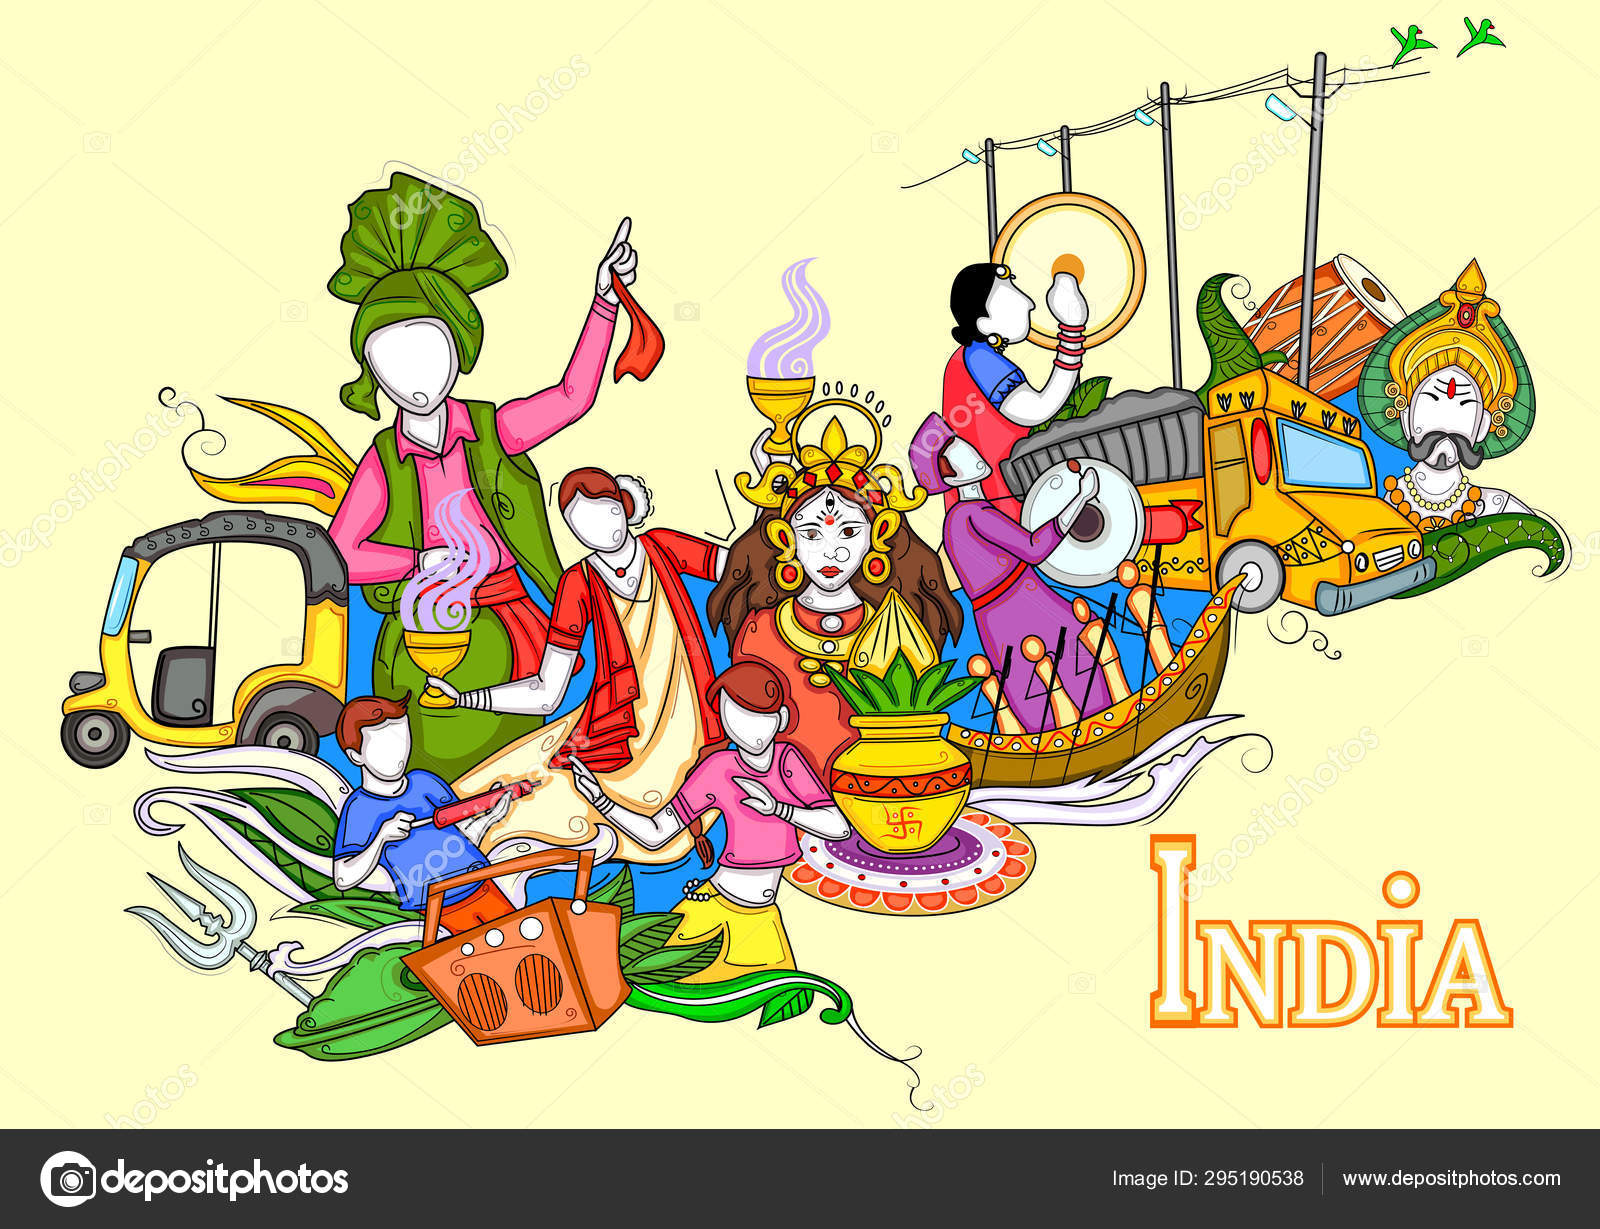 Indian Collage Illustration Showing Culture Tradition And Festival Of India Stock Illustration